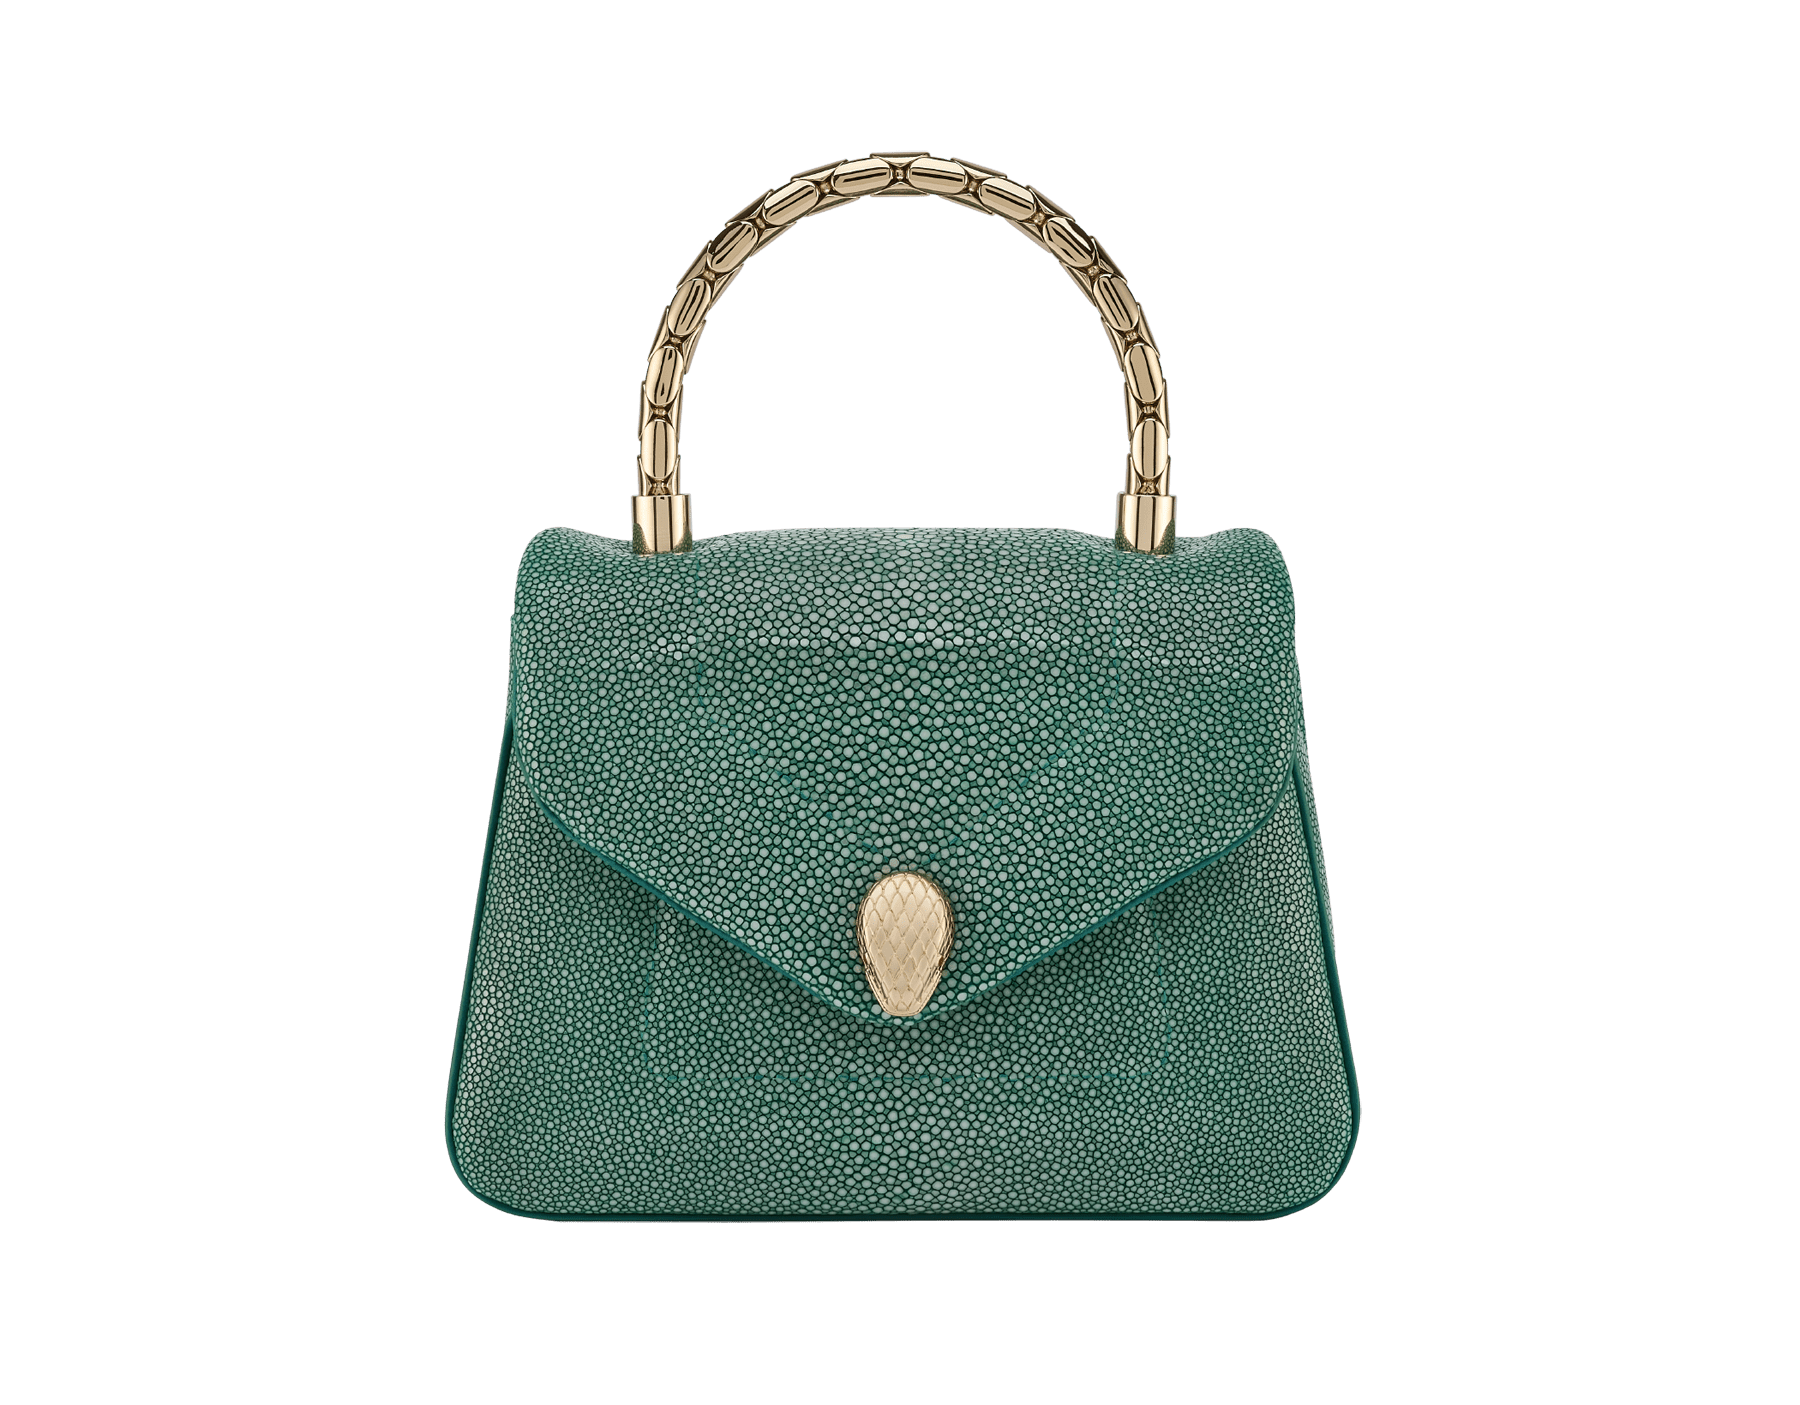 Serpenti Reverse small top handle bag in soft emerald green galuchat skin with amethyst purple nappa leather lining. Captivating magnetic snakehead closure in light gold-plated brass embellished with red enamel eyes. 1234-SG image 1